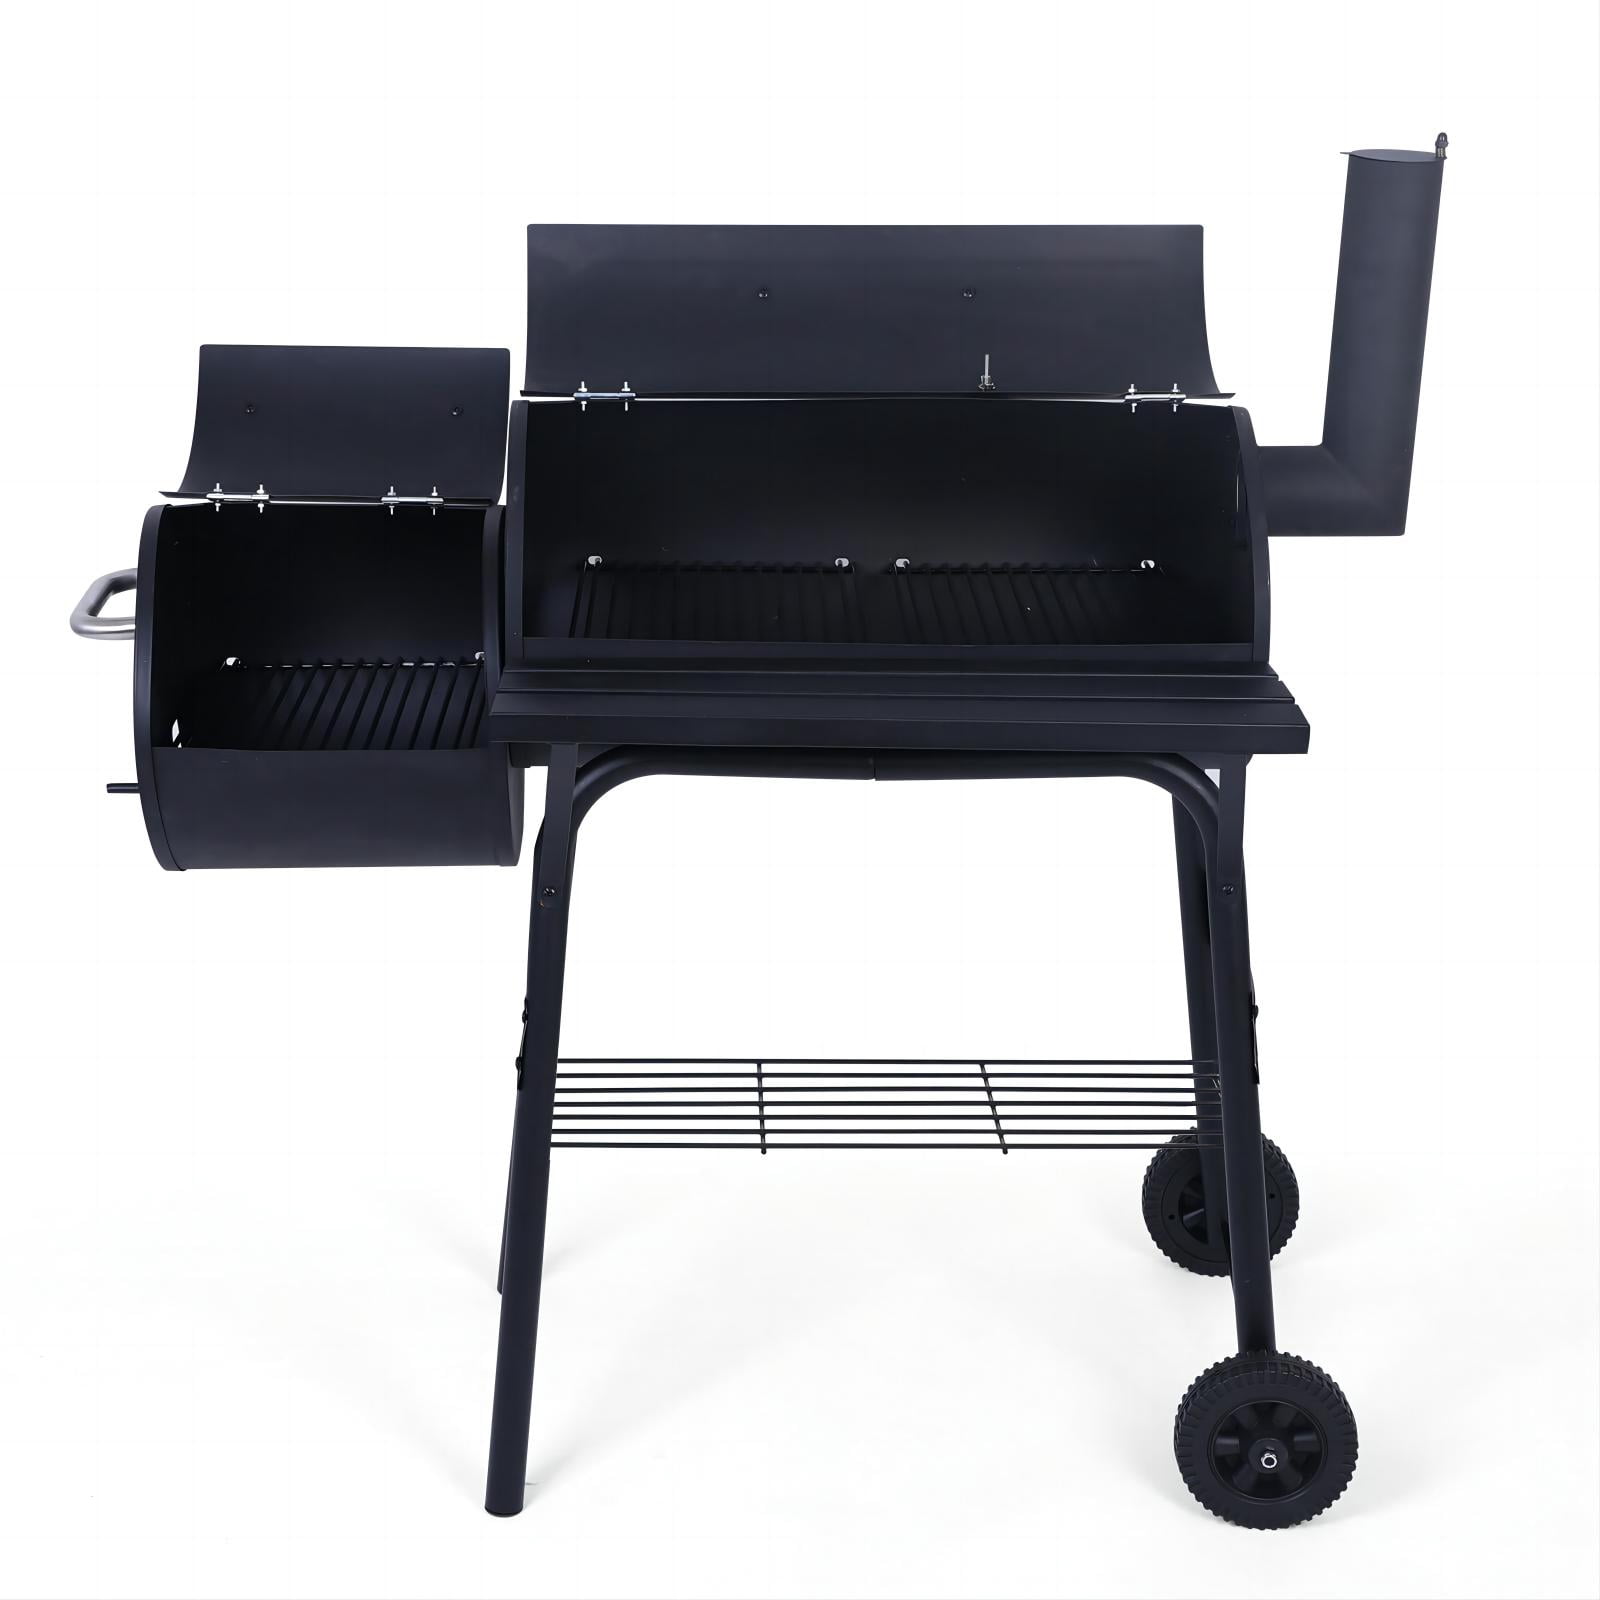 GMG Offset Wood Portable 219 Square Inches Smoker & Grill & Reviews